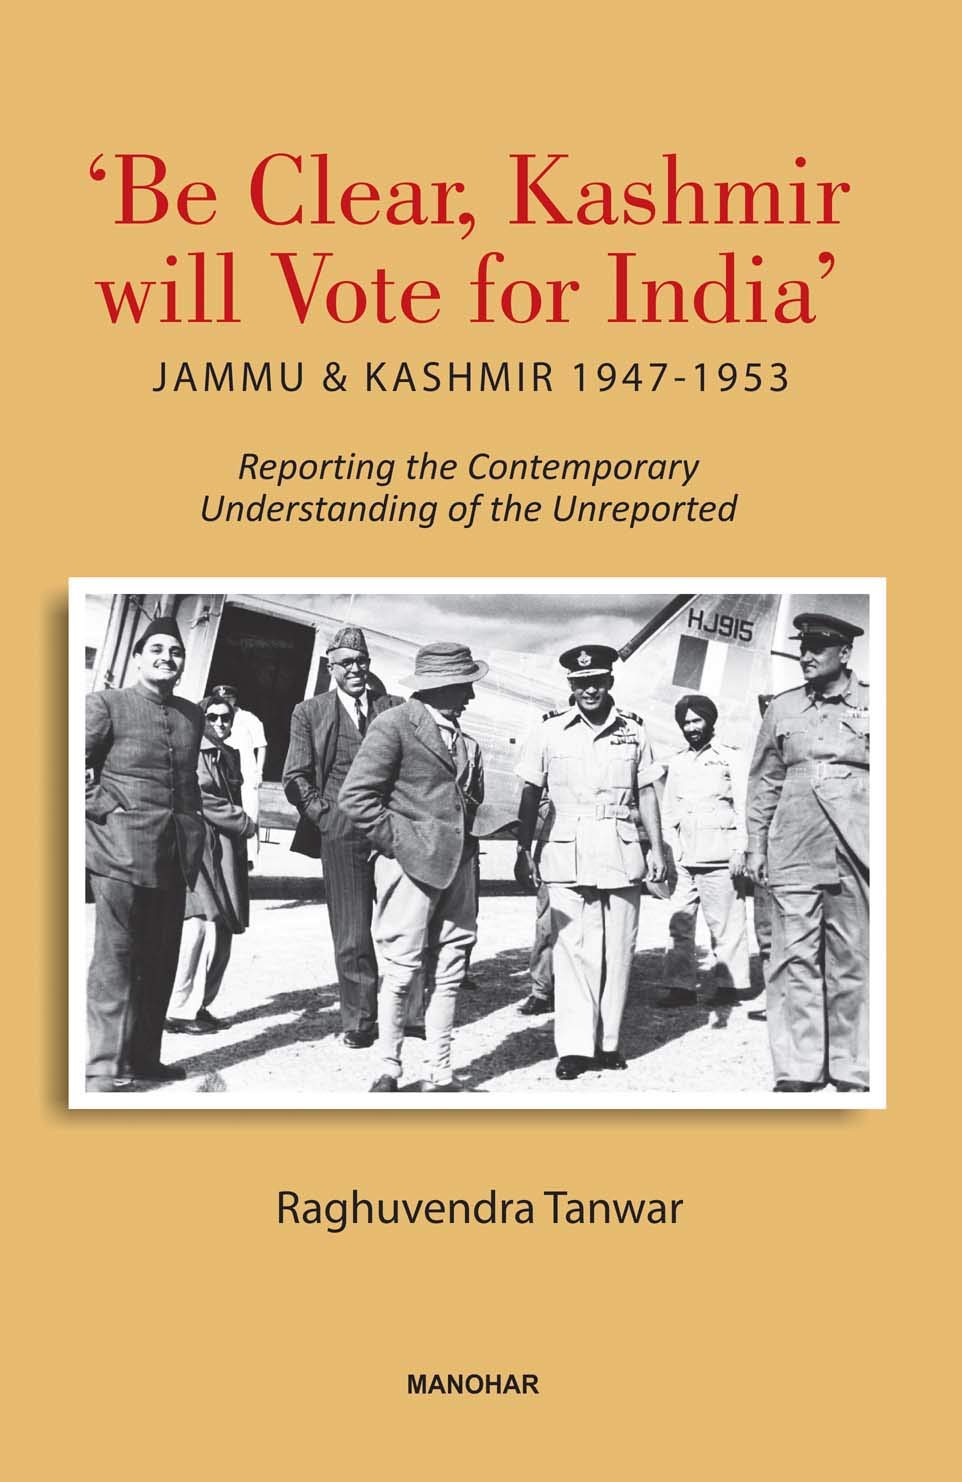 ‘Be Clear, Kashmir will Vote for India’: Jammu & Kashmir 1947-1953 – Reporting the Contemporary Understanding of the Unreported